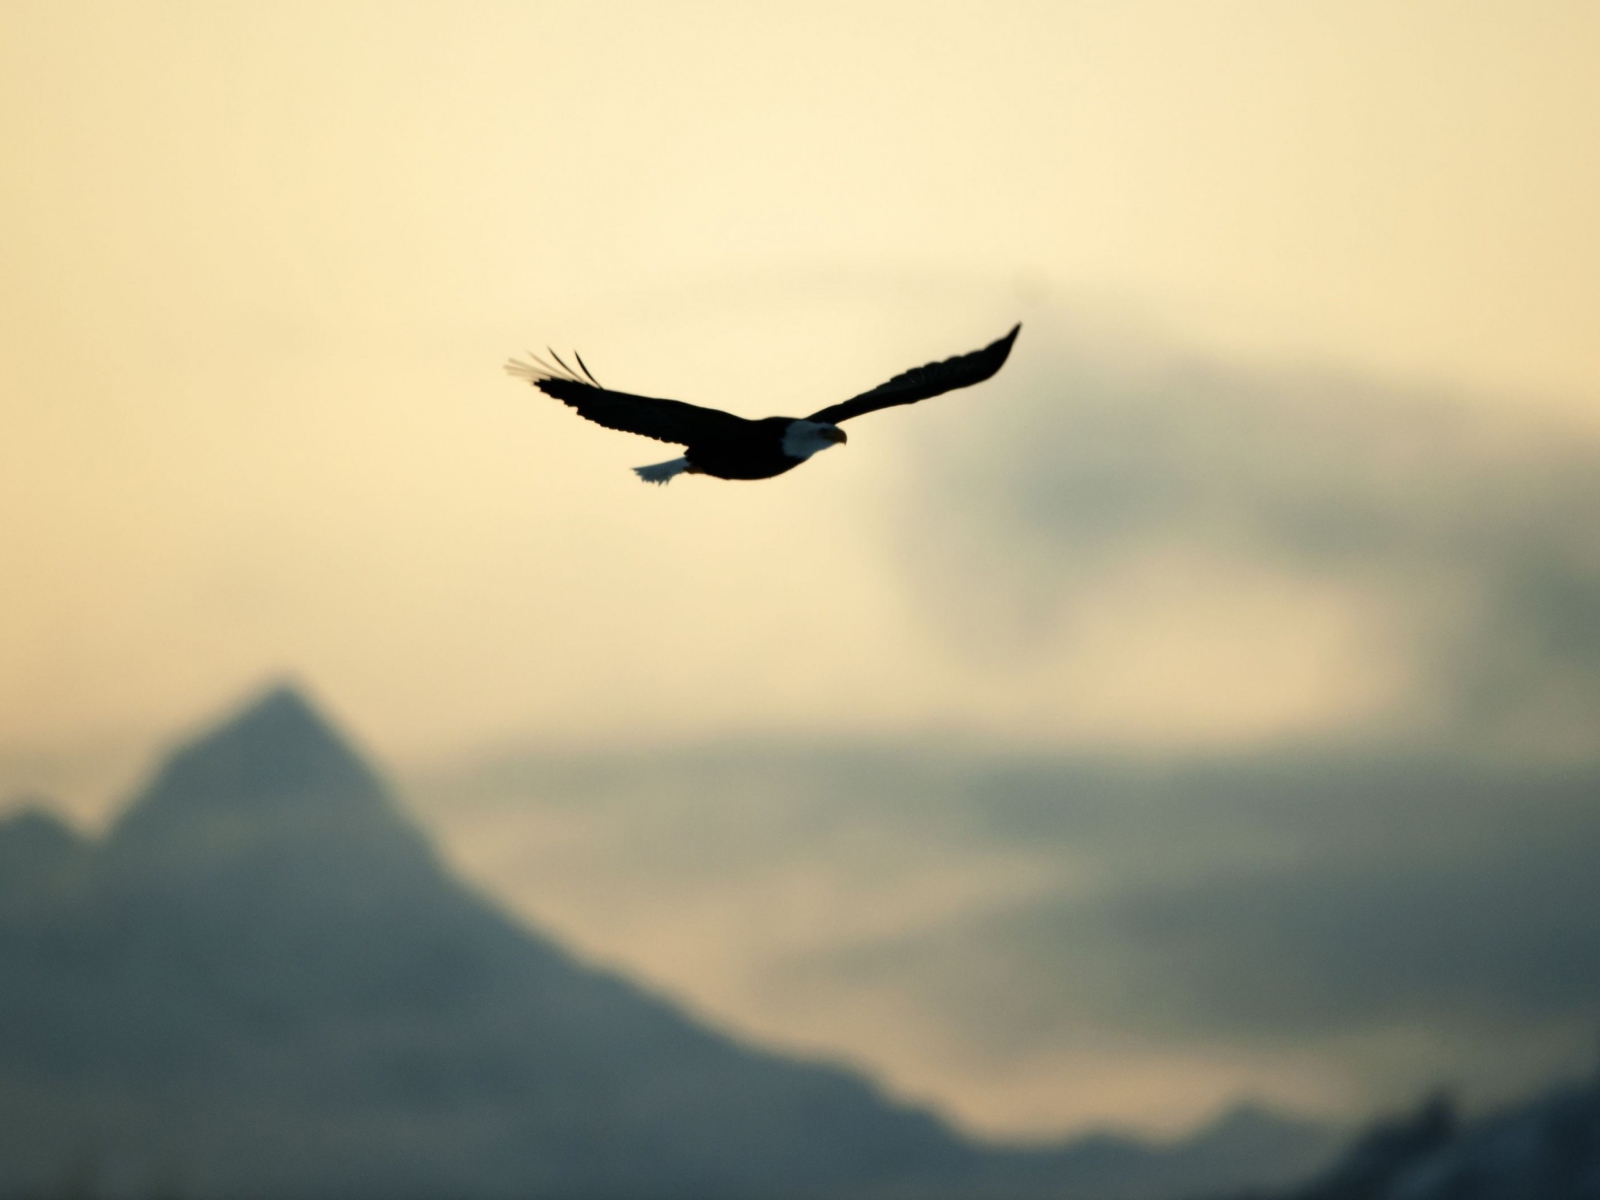 Eagle In The Sky wallpaper 1600x1200